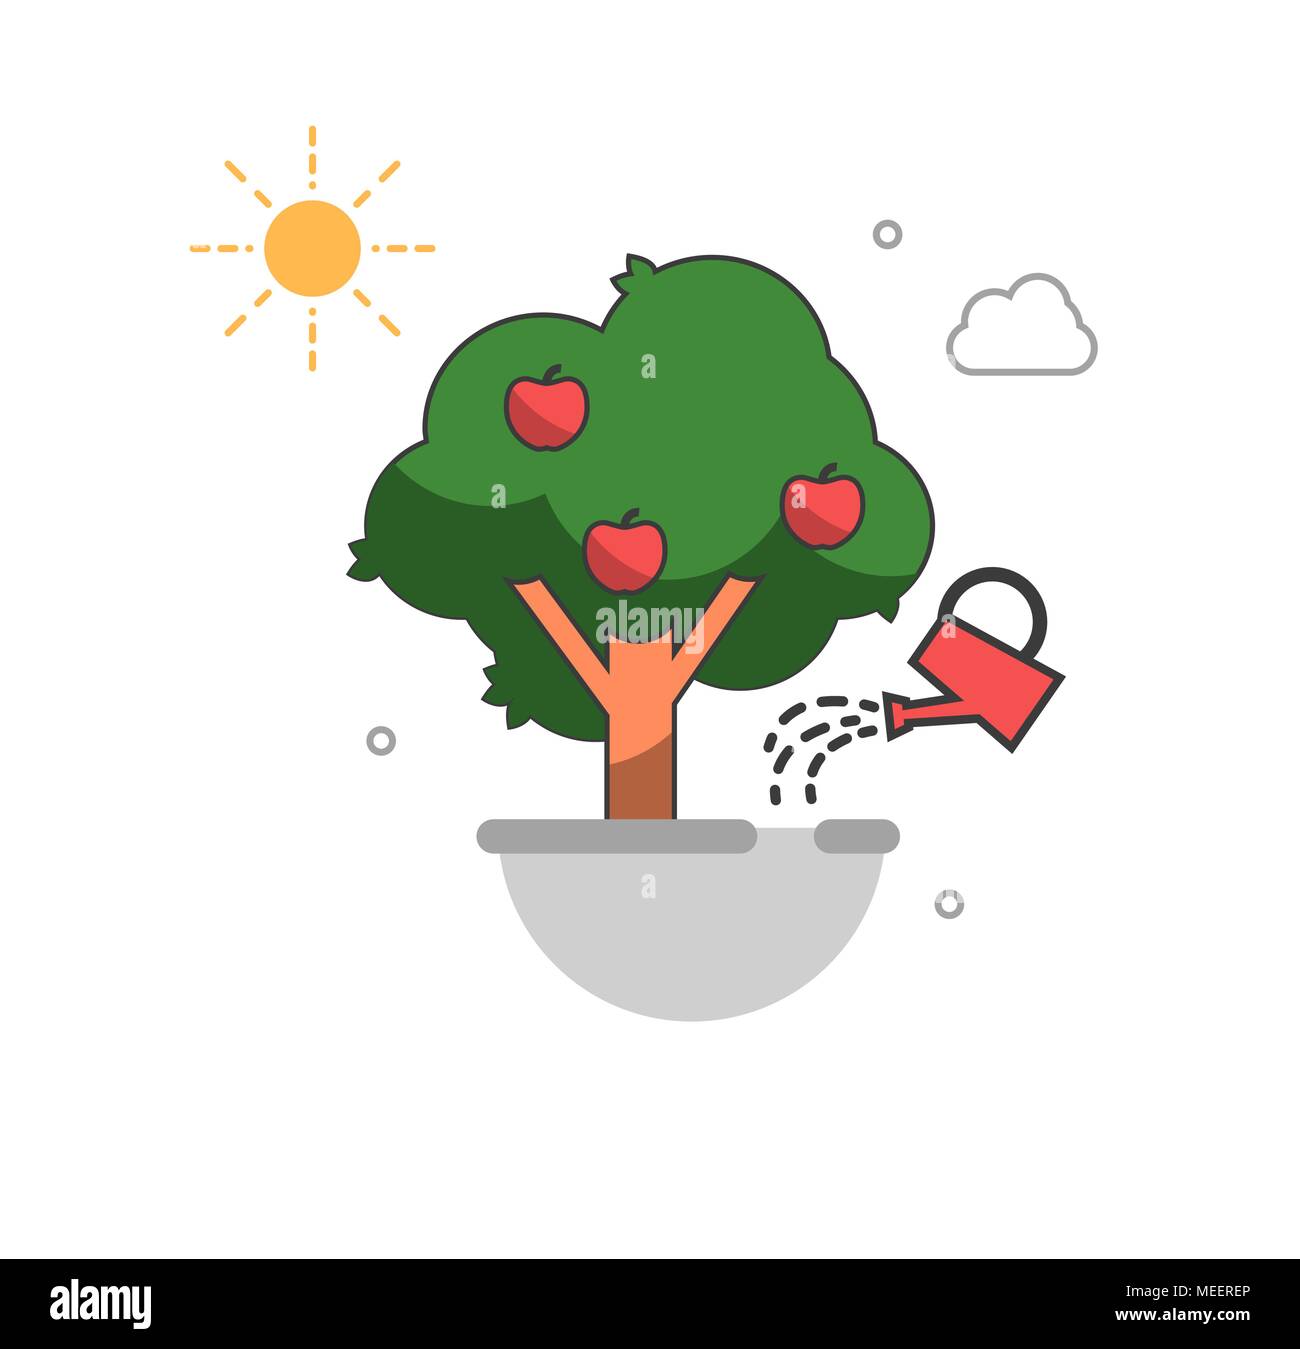 Timeline infographic of planting tree process, business concept flat design Stock Vector